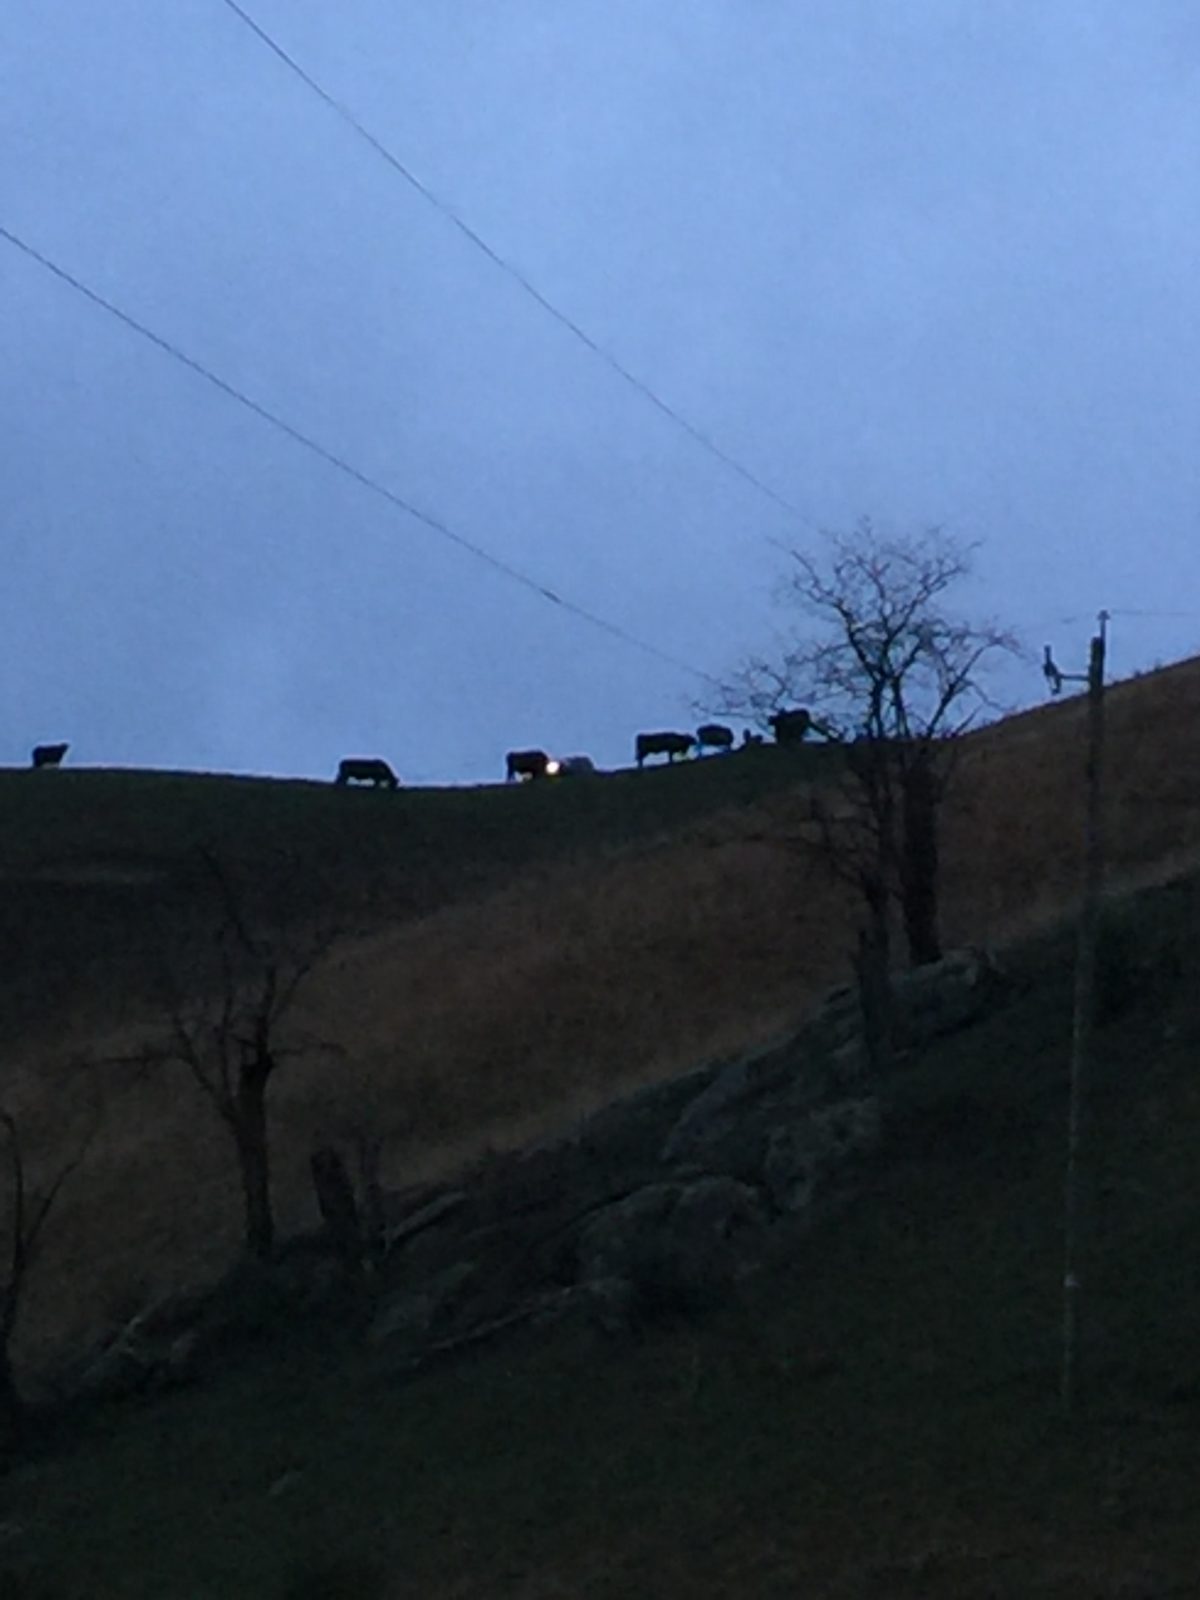 Farmer's truck with his cattle at night